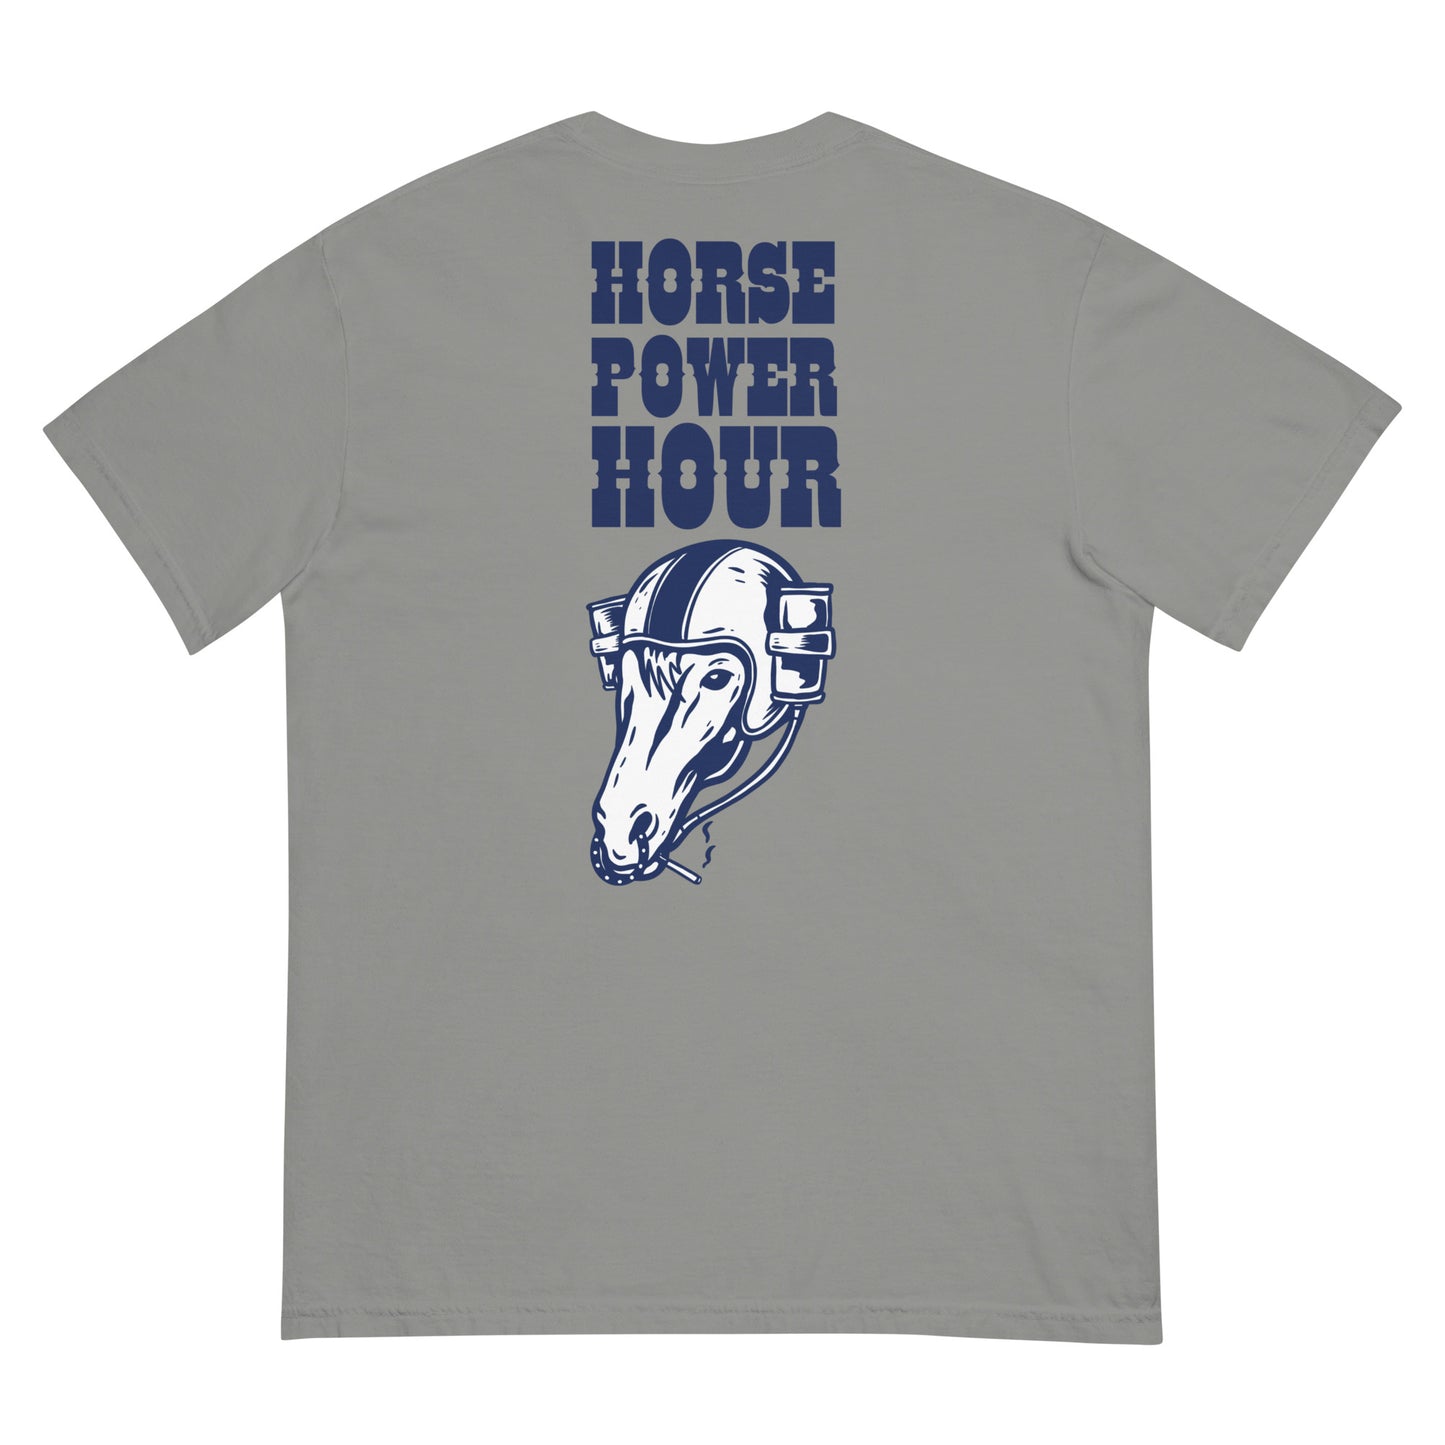 Horse Power Hour Front/Back